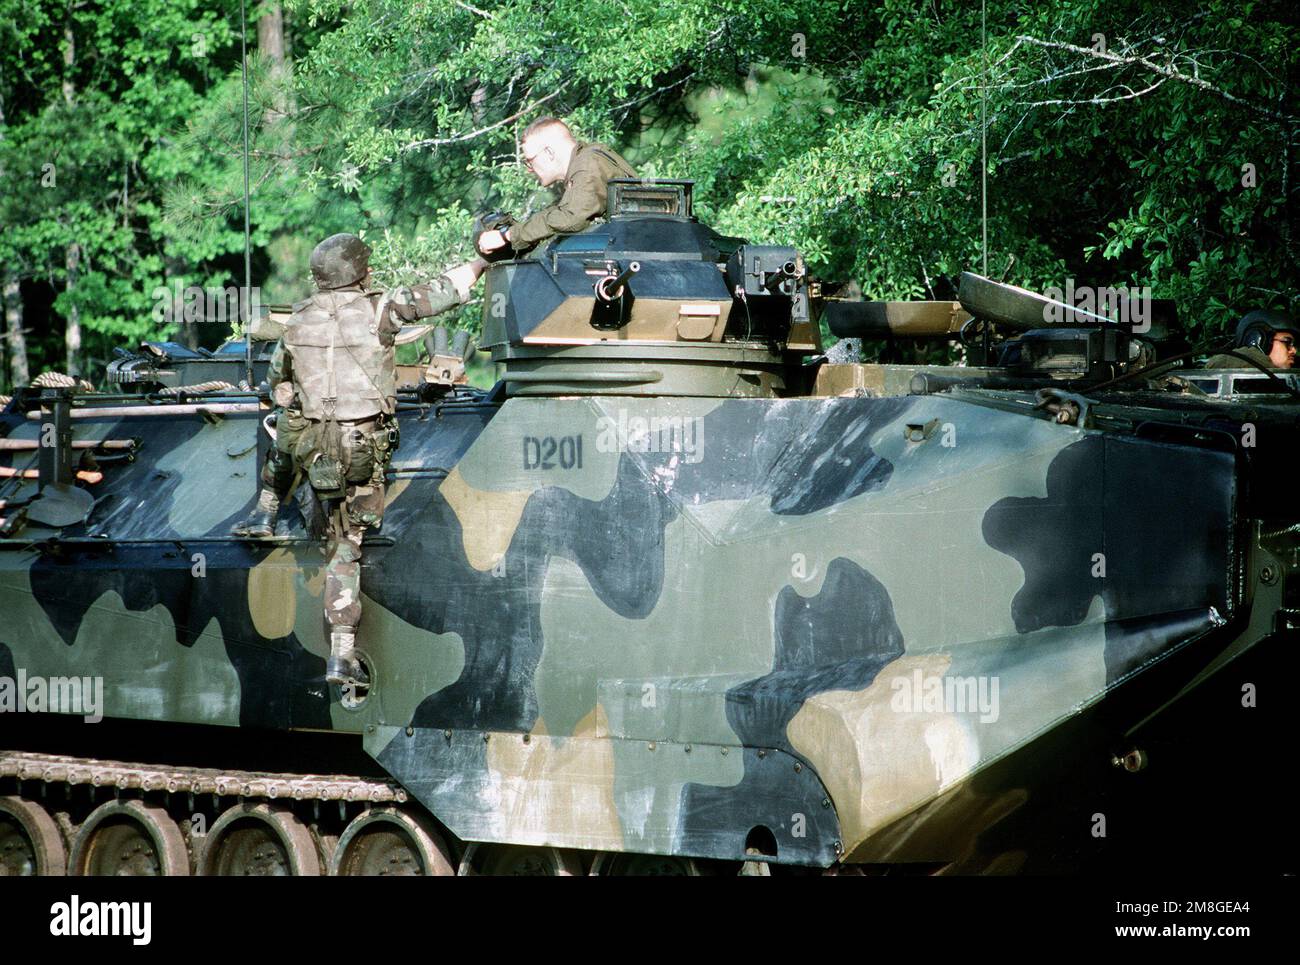 Marines of the 3rd Battalion, Camp Lejeune, N.C., climb into a Marine AAV-7A1 armored assault vehicle in amphibious assault training during a joint military exercise called OCEAN VENTURE '92. Subject Operation/Series: OCEAN VENTURE '92 State: North Carolina(NC) Country: United States Of America (USA) Stock Photo